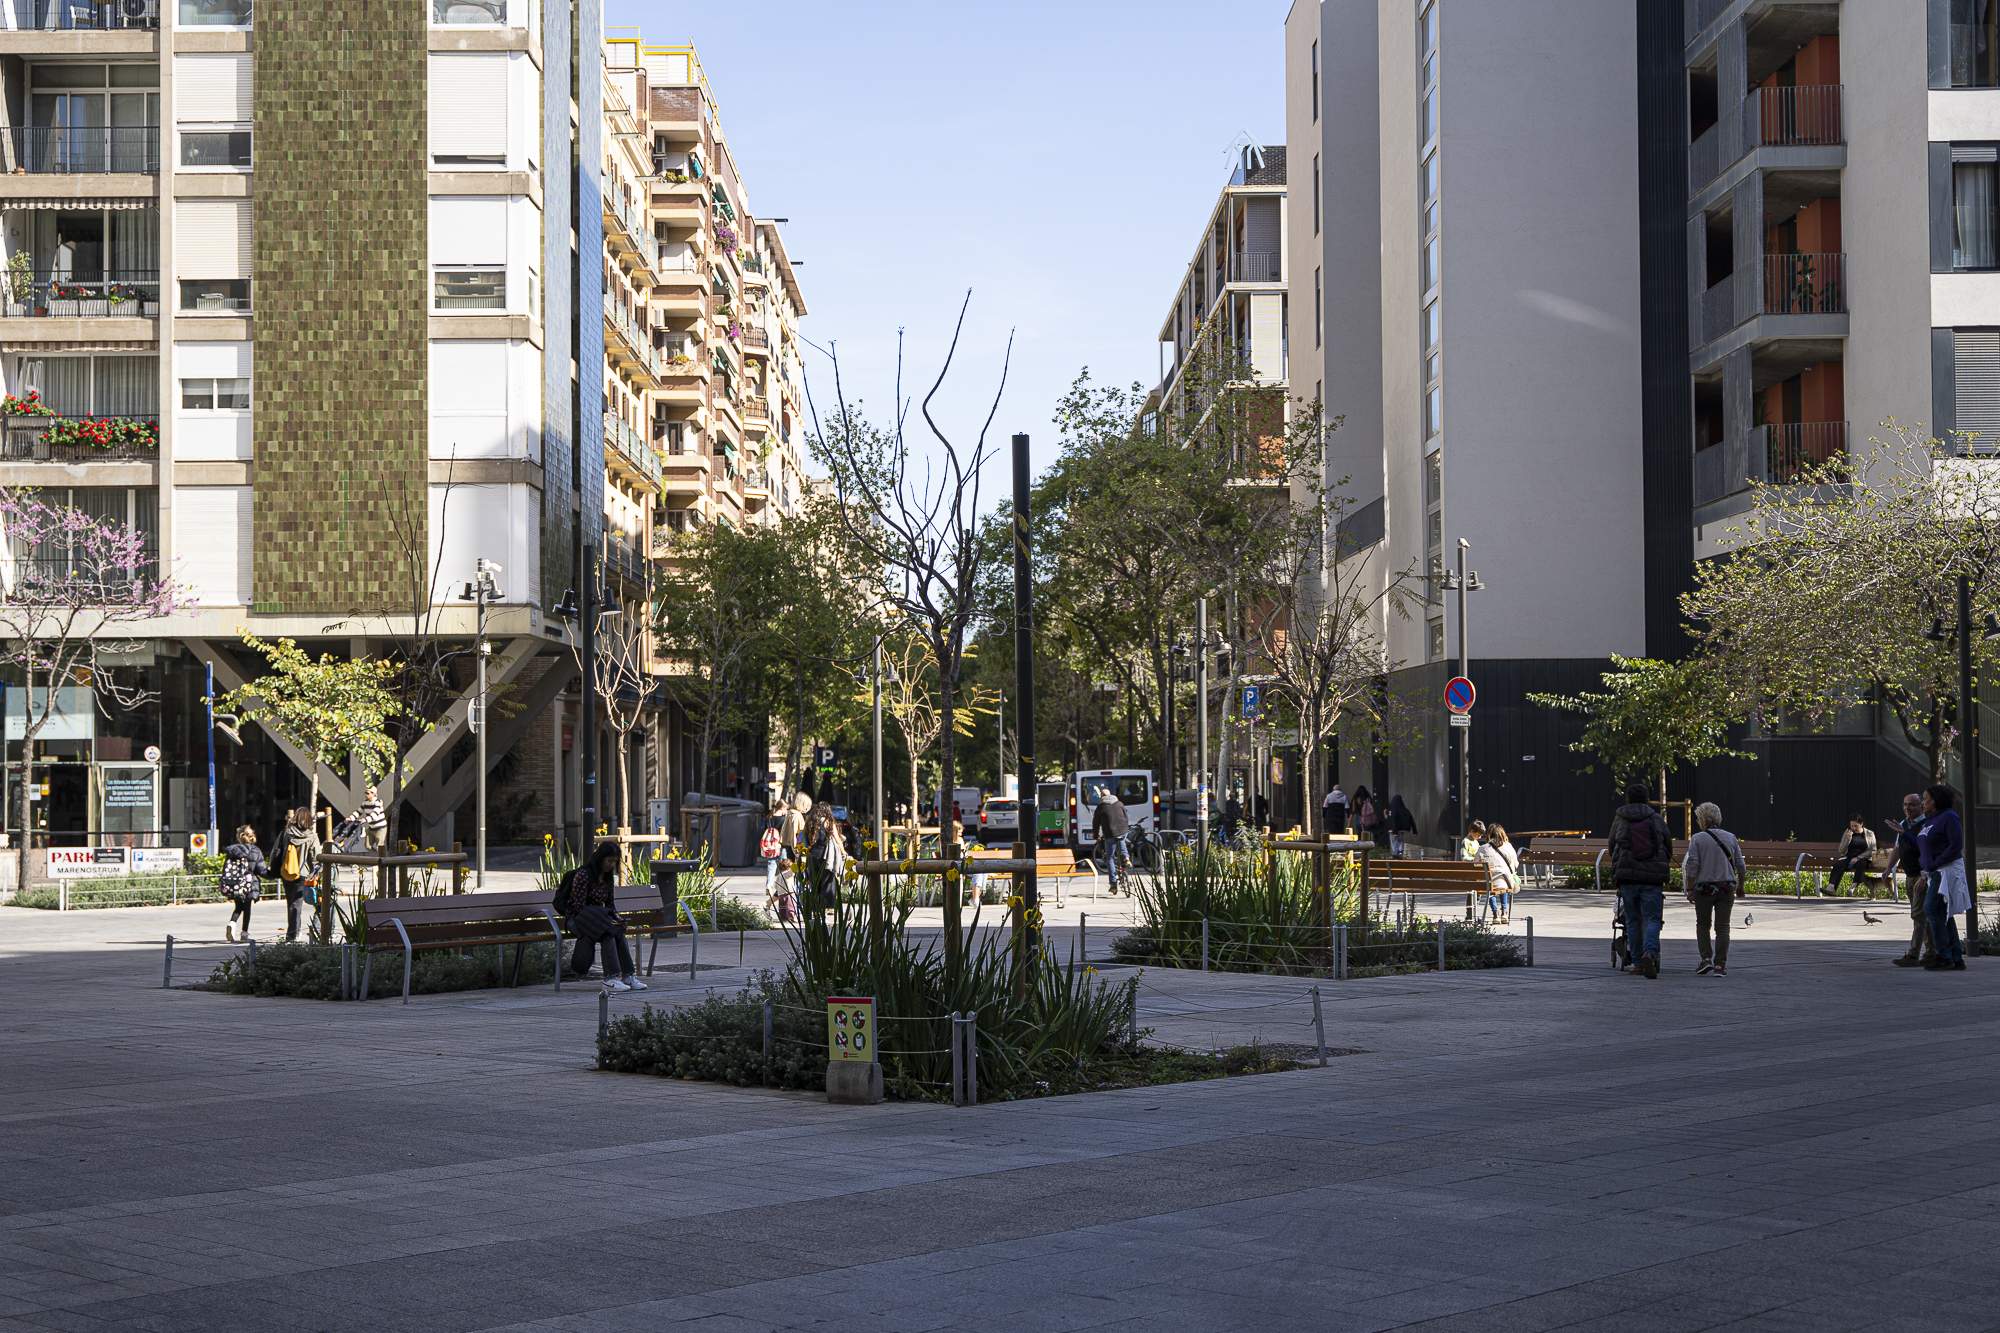 Barcelona won't replicate 'Green Axis' street model due to "cost and coexistence" issues